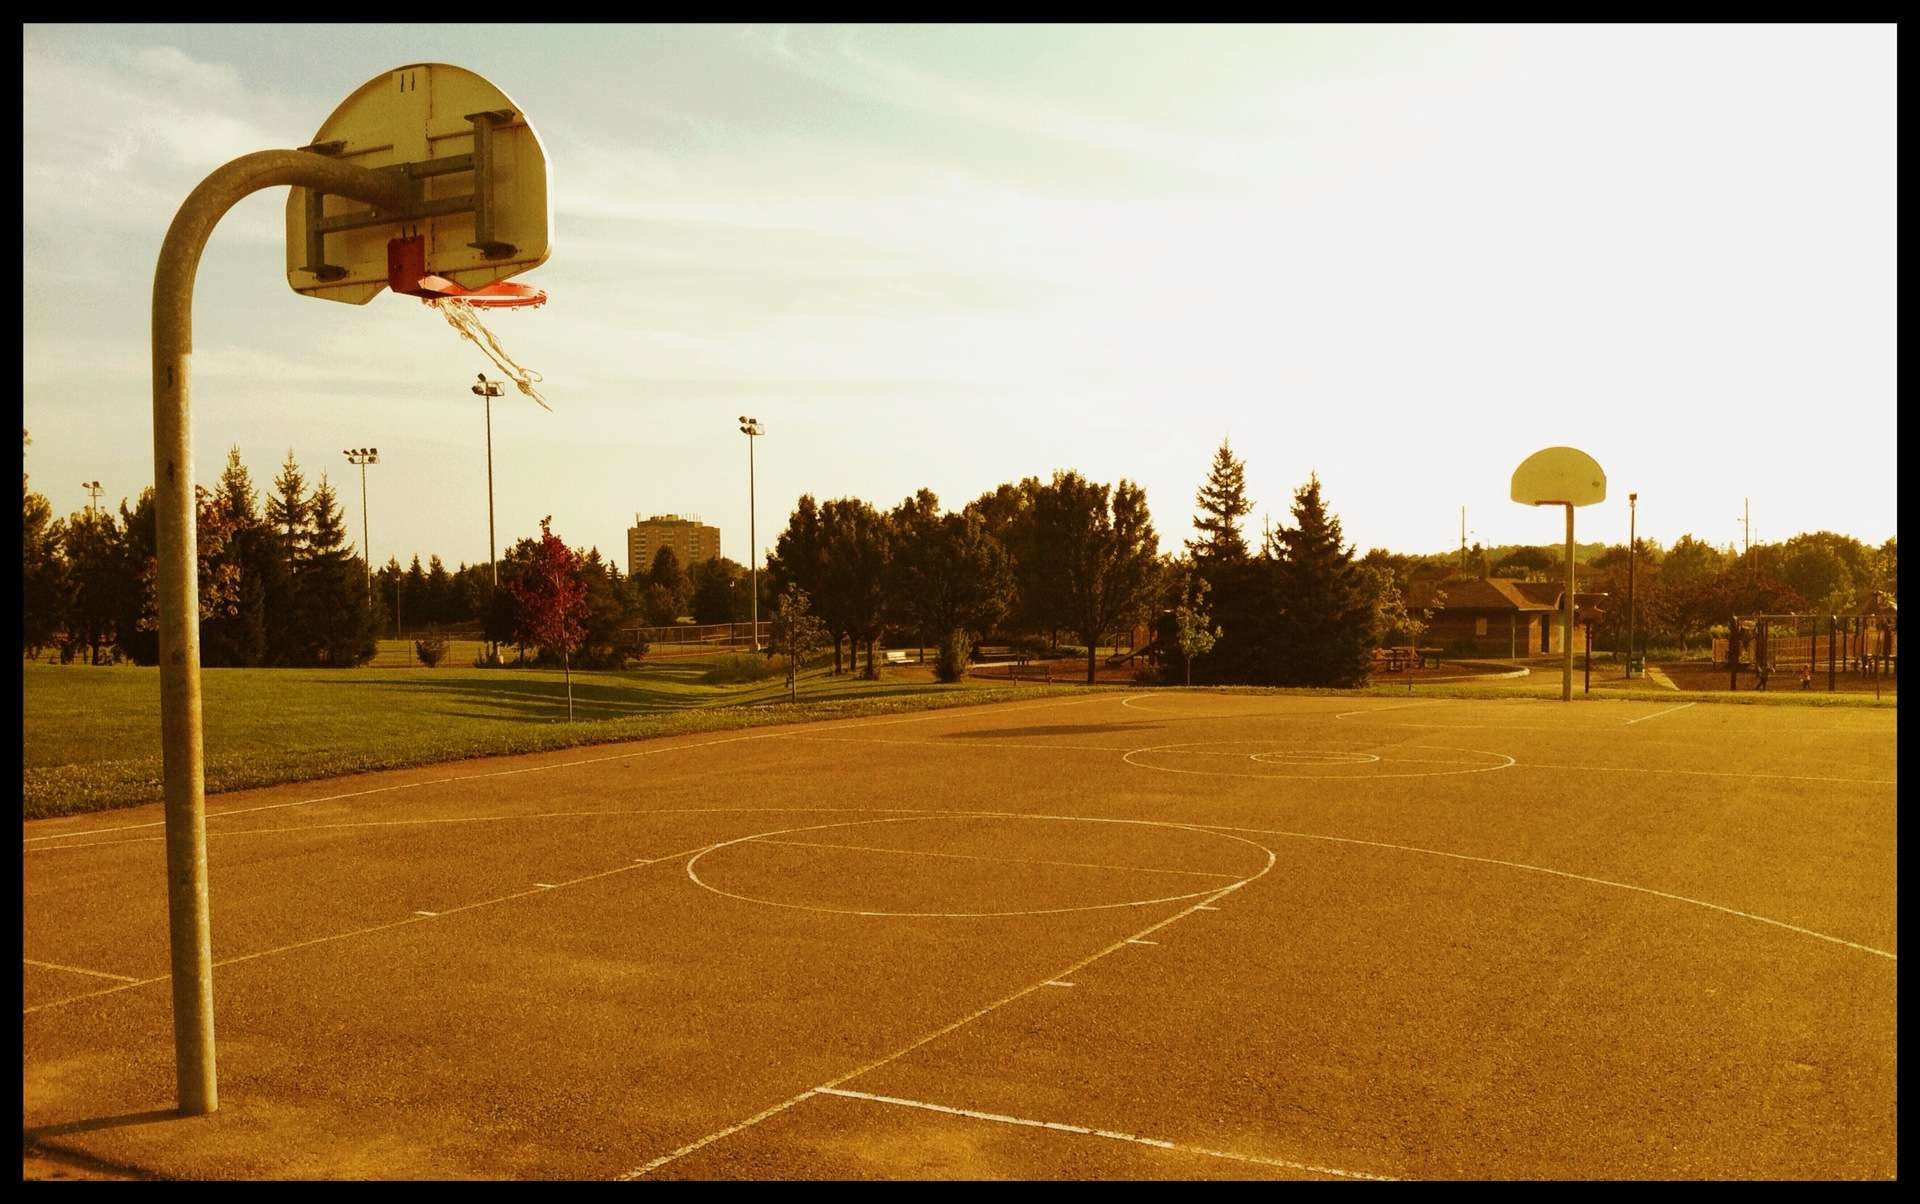 1920x1204 Ajax Basketball Photos: Millers Creek Community Park - Courts of the World